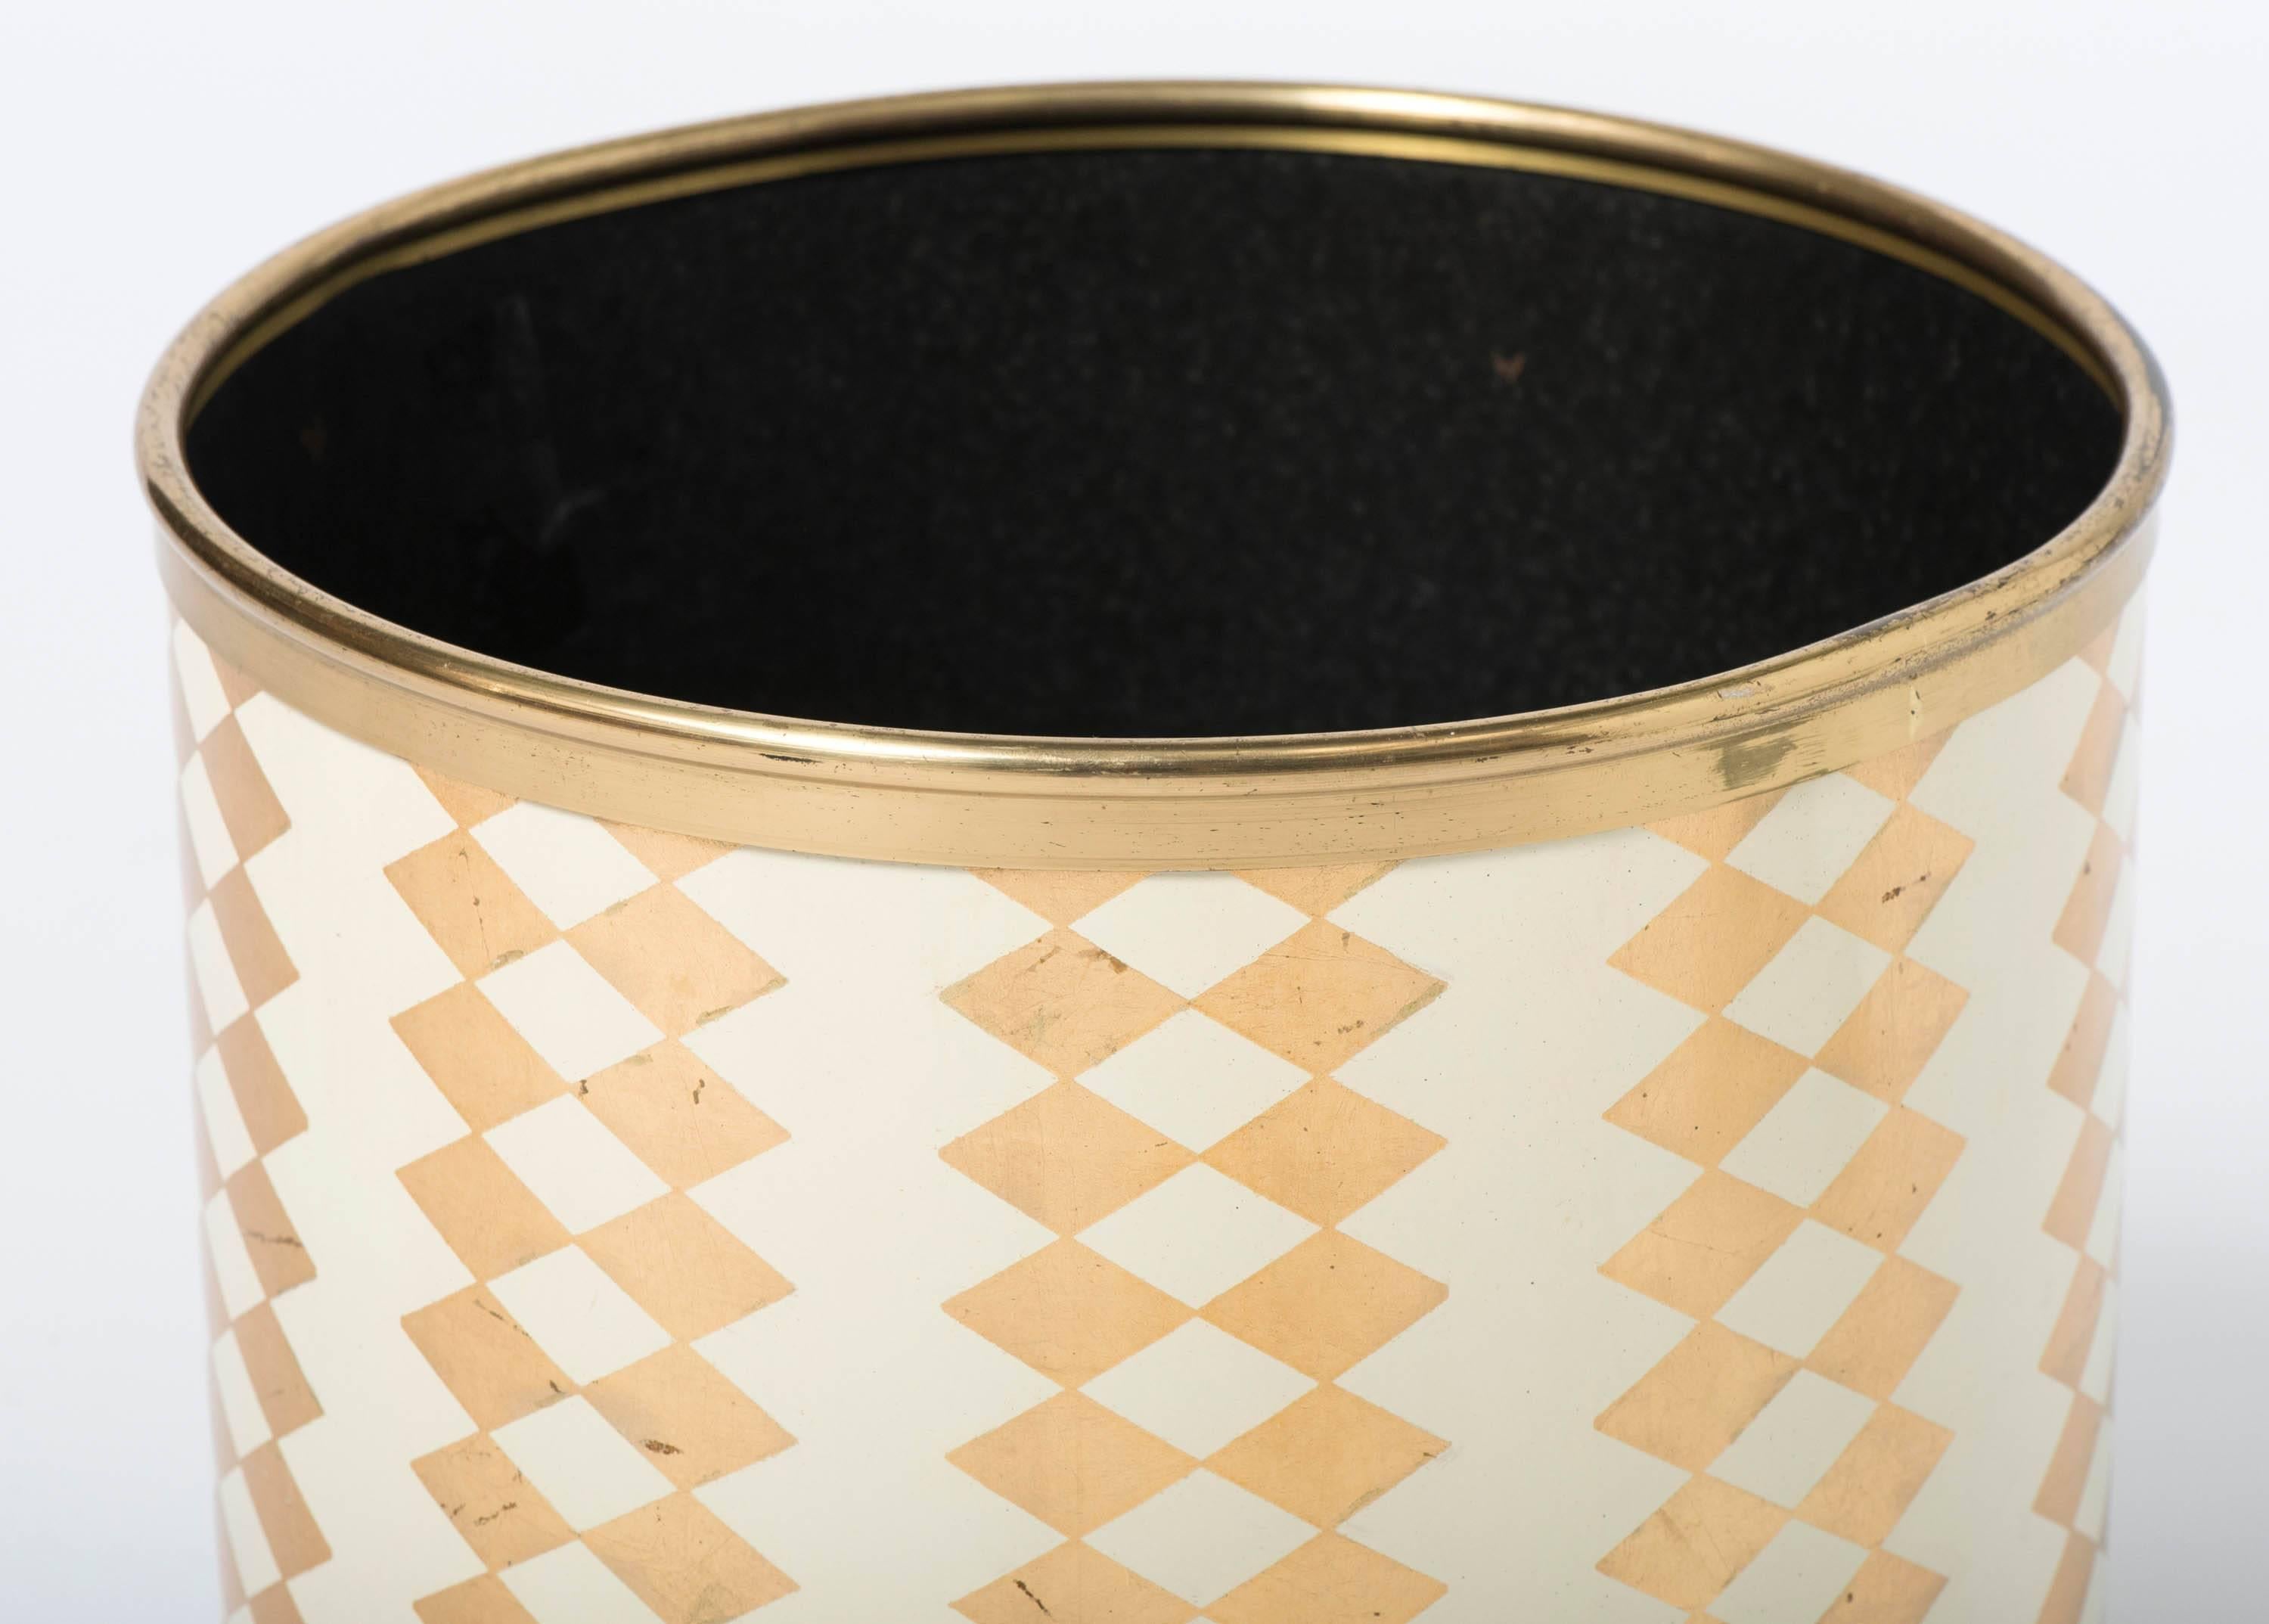 An early wastepaper bin by Piero Fornasetti.
“Picolo rombi” gold diamonds on cream.
Metal, cream heightened with gilt.
Marks to base.
Italy, circa 1950.
Measures: 28 cm high x 26 cm diameter.
     